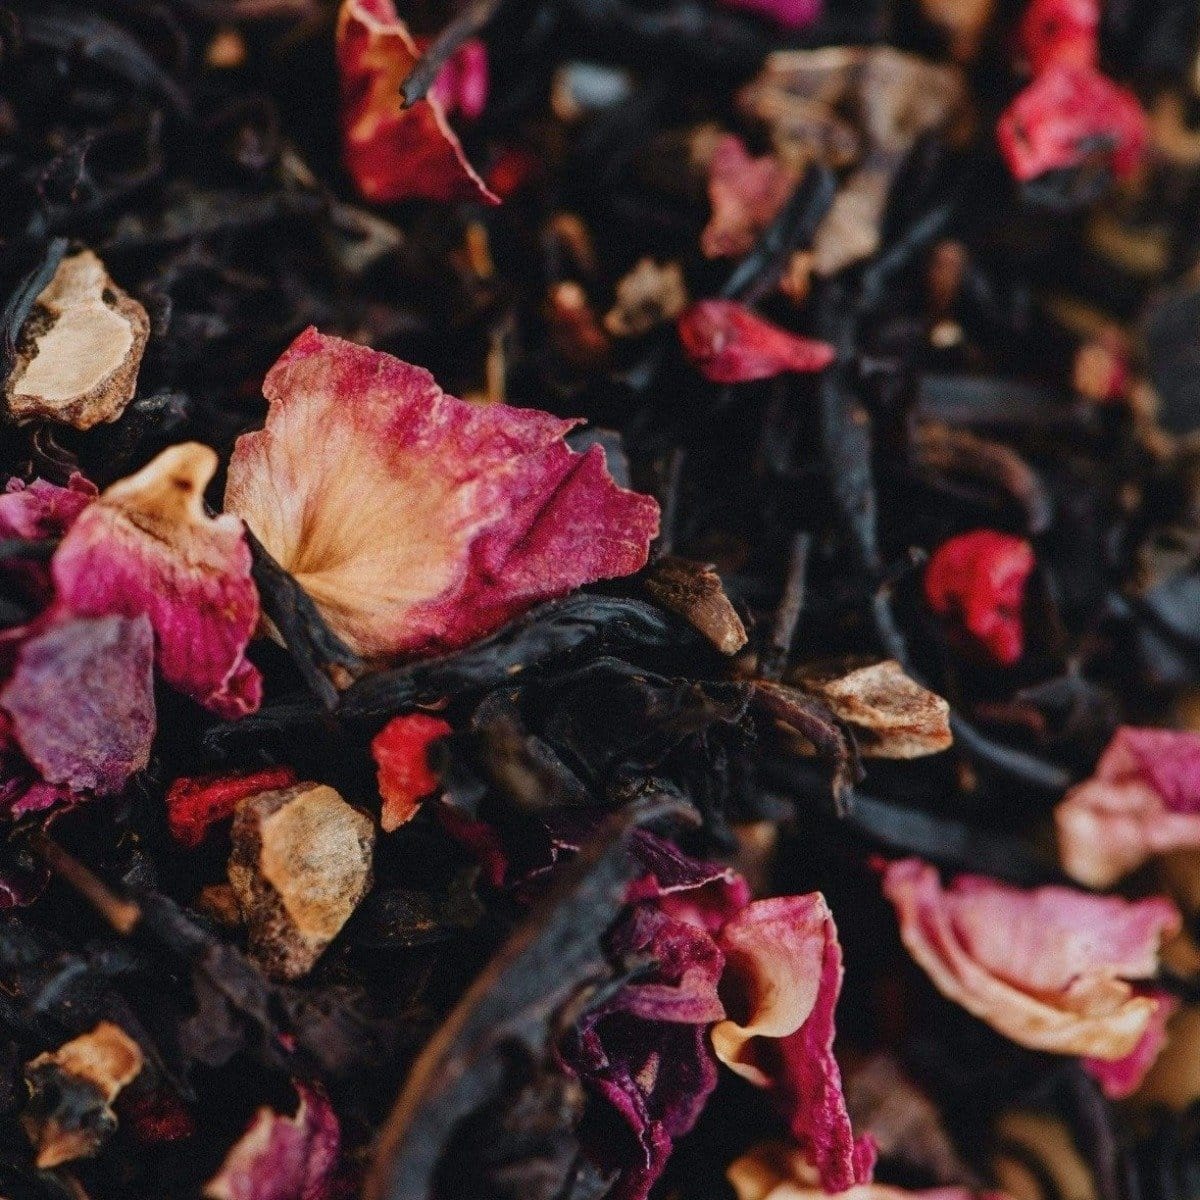 Close-up of a colorful blend of Soulmate: Chocolate-Raspberry-Rose Black Tea Traveler, featuring dried tea leaves and flower petals. The mixture includes dark loose leaf tea interspersed with vibrant pink, red, and purple petals, creating a visually rich and textured composition.